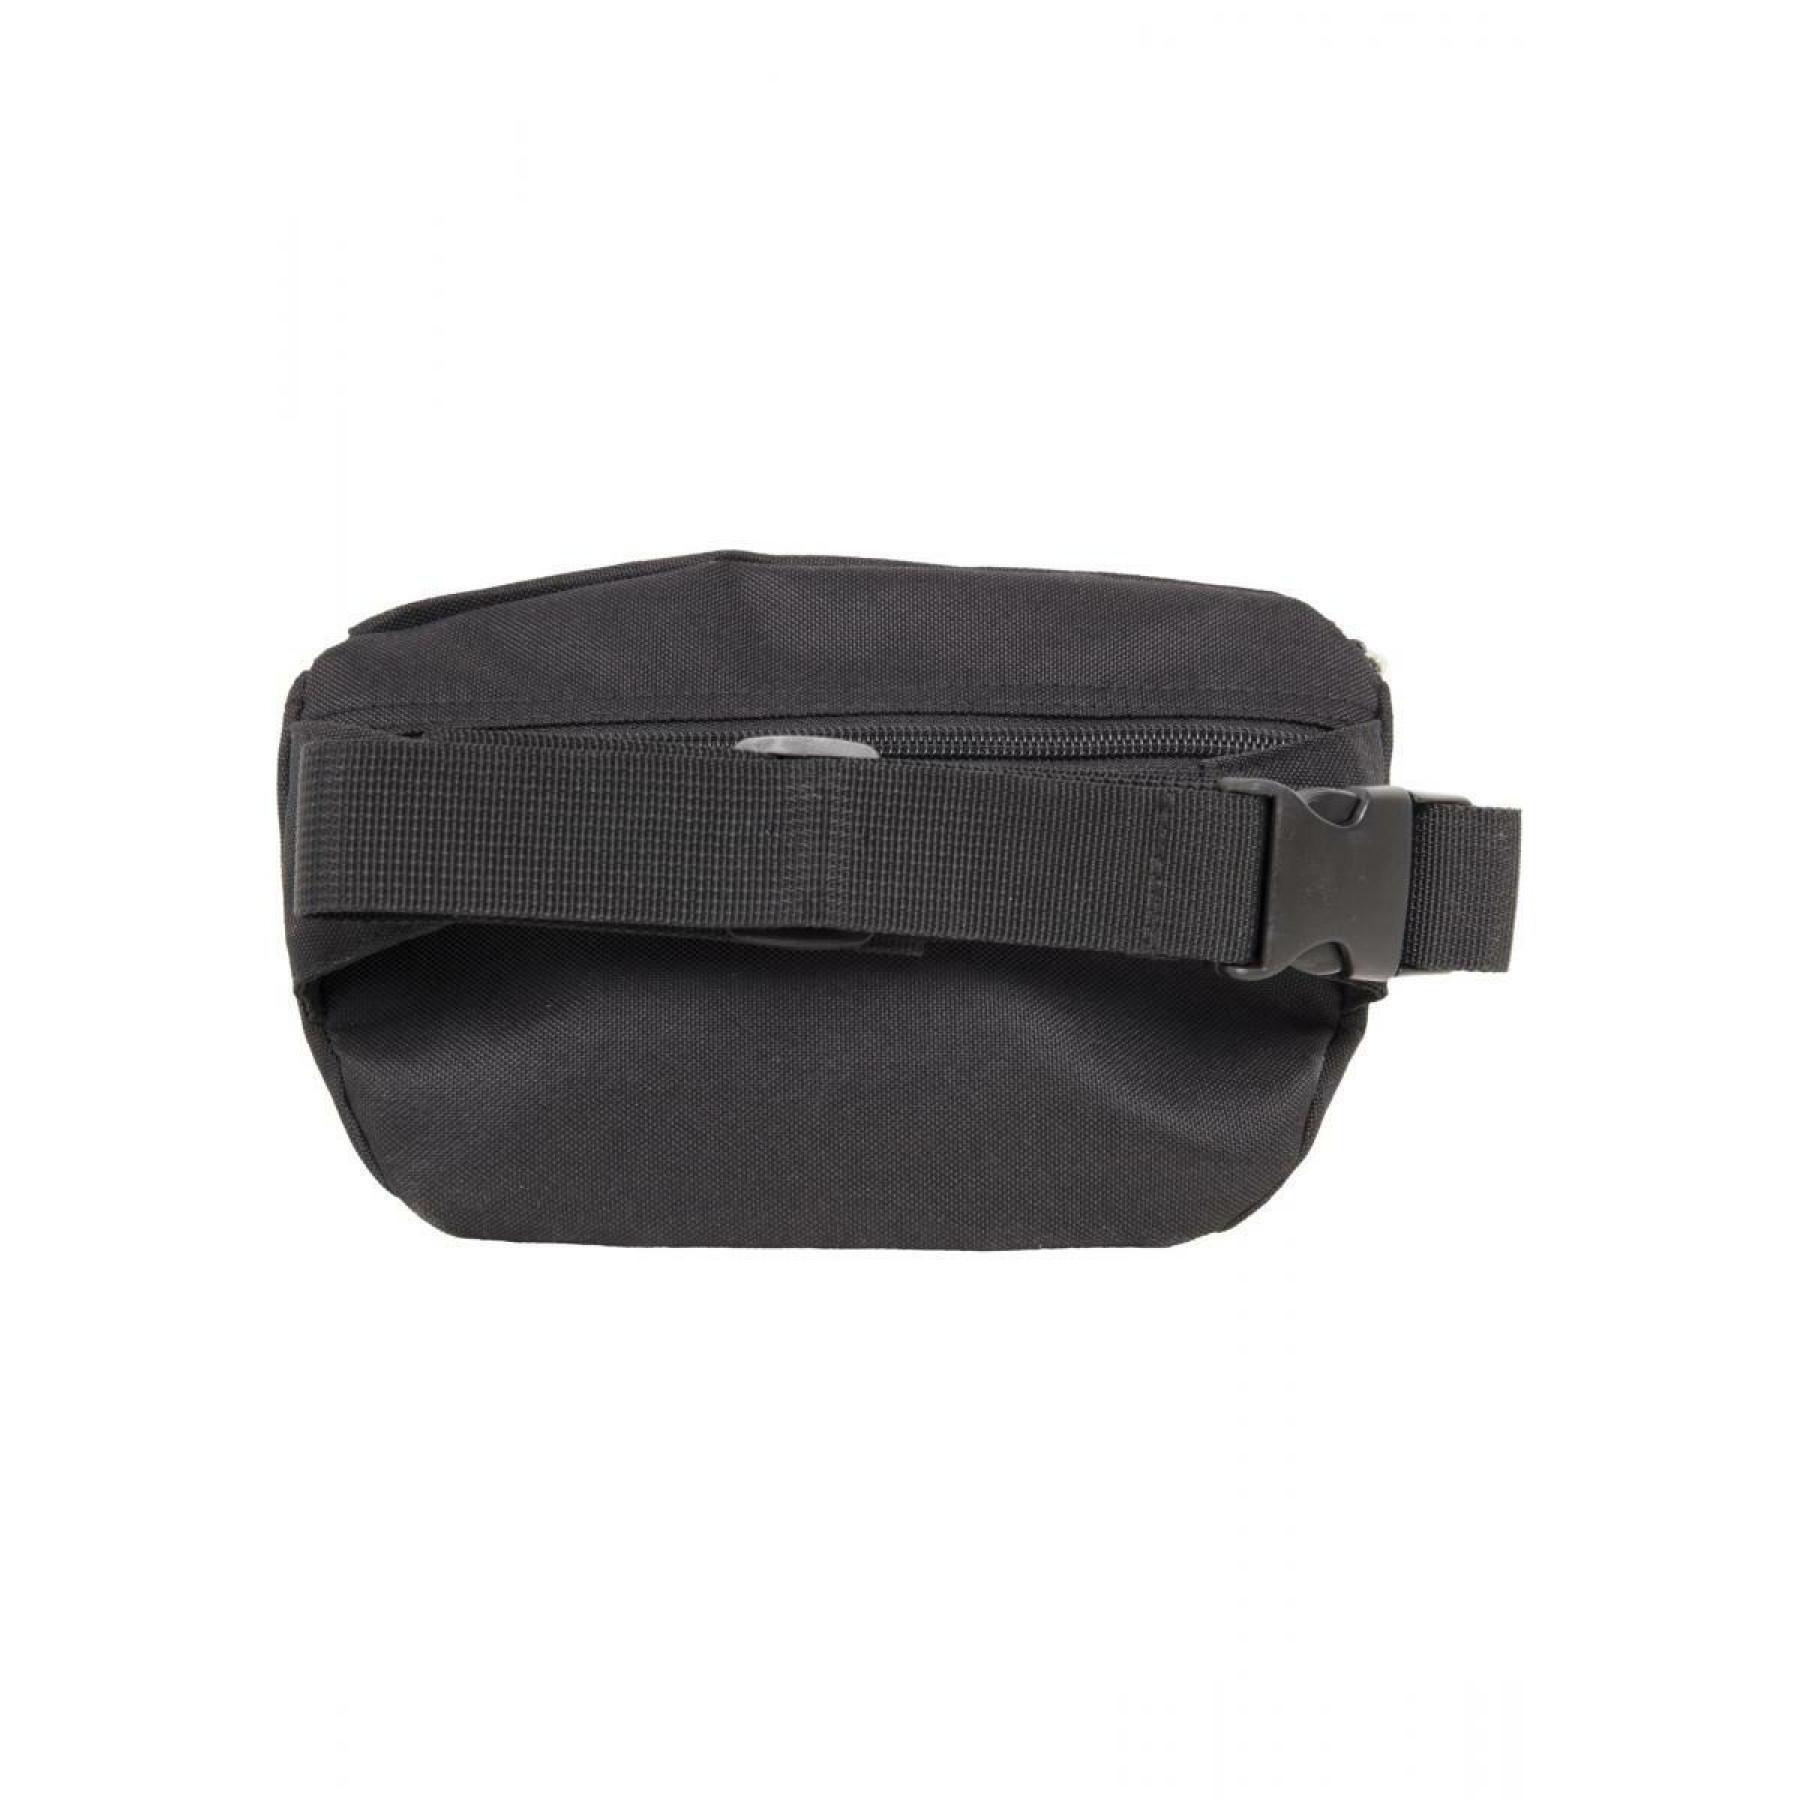 Fanny pack Urban Classics money to blow